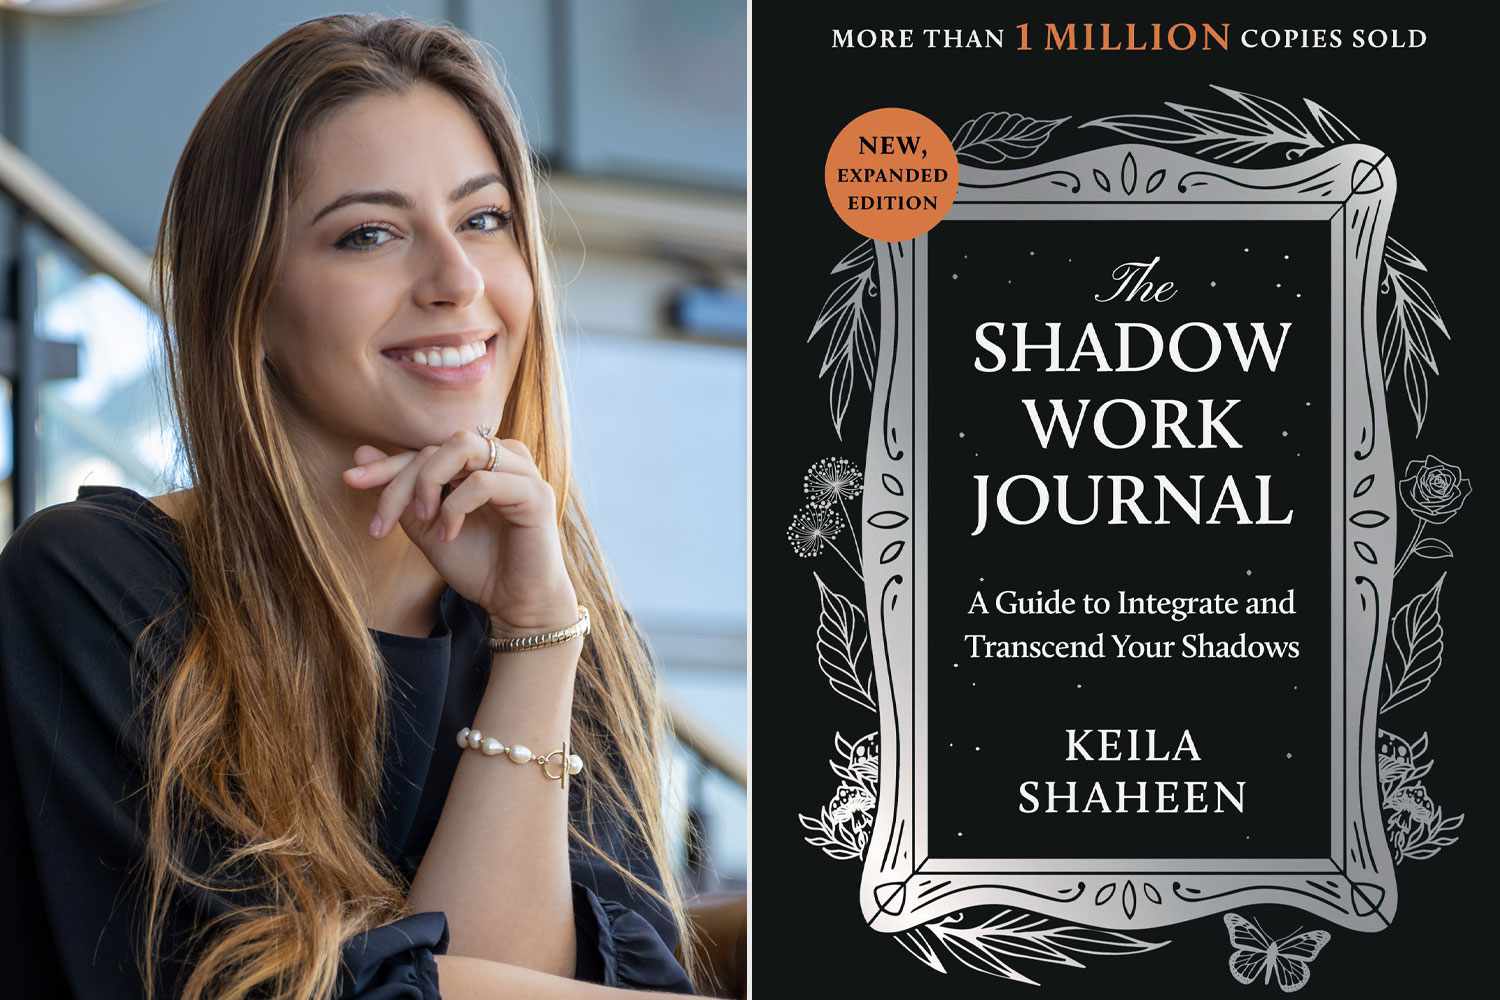 keila shaheen talks new edition of bestselling “shadow work journal”: ‘it’s all about coming back to yourself’ (exclusive)